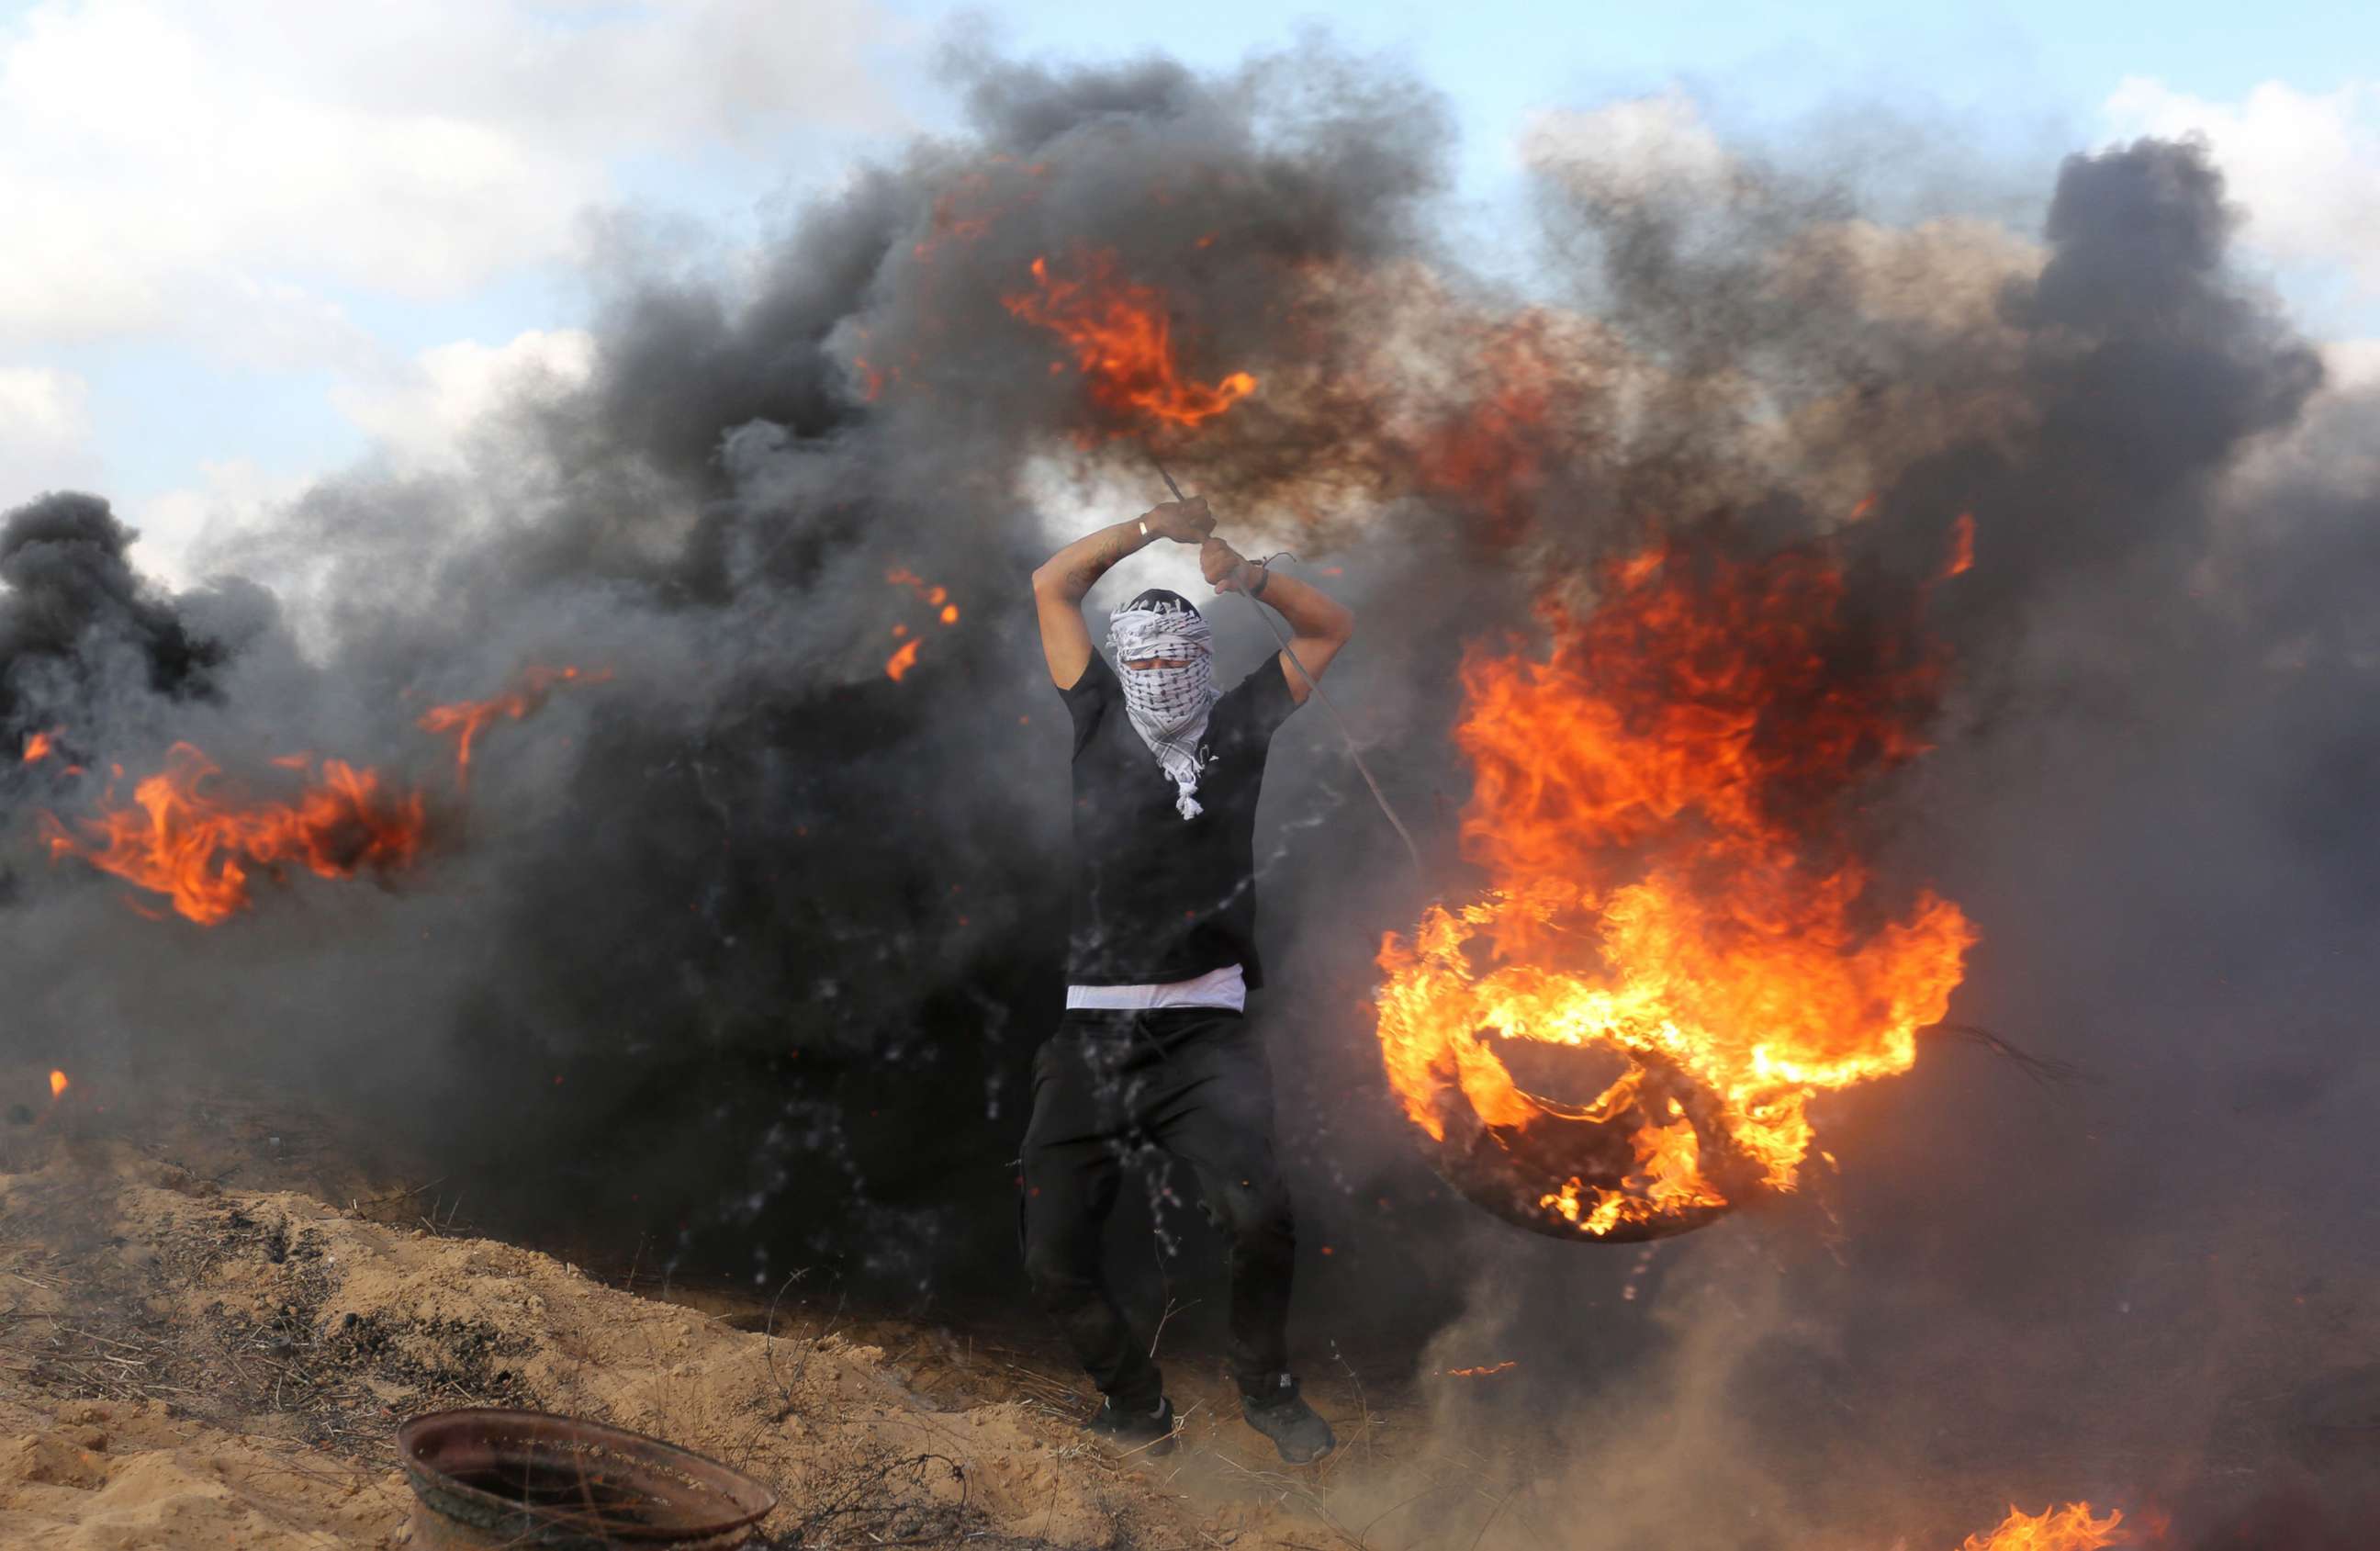 PHOTO: Palestinian protesters burn tires in response to Israeli forces' intervention on the 14th week of right of return march along the border with Israel, east of Khan Yunis in the southern Gaza Strip on June 29, 2018.